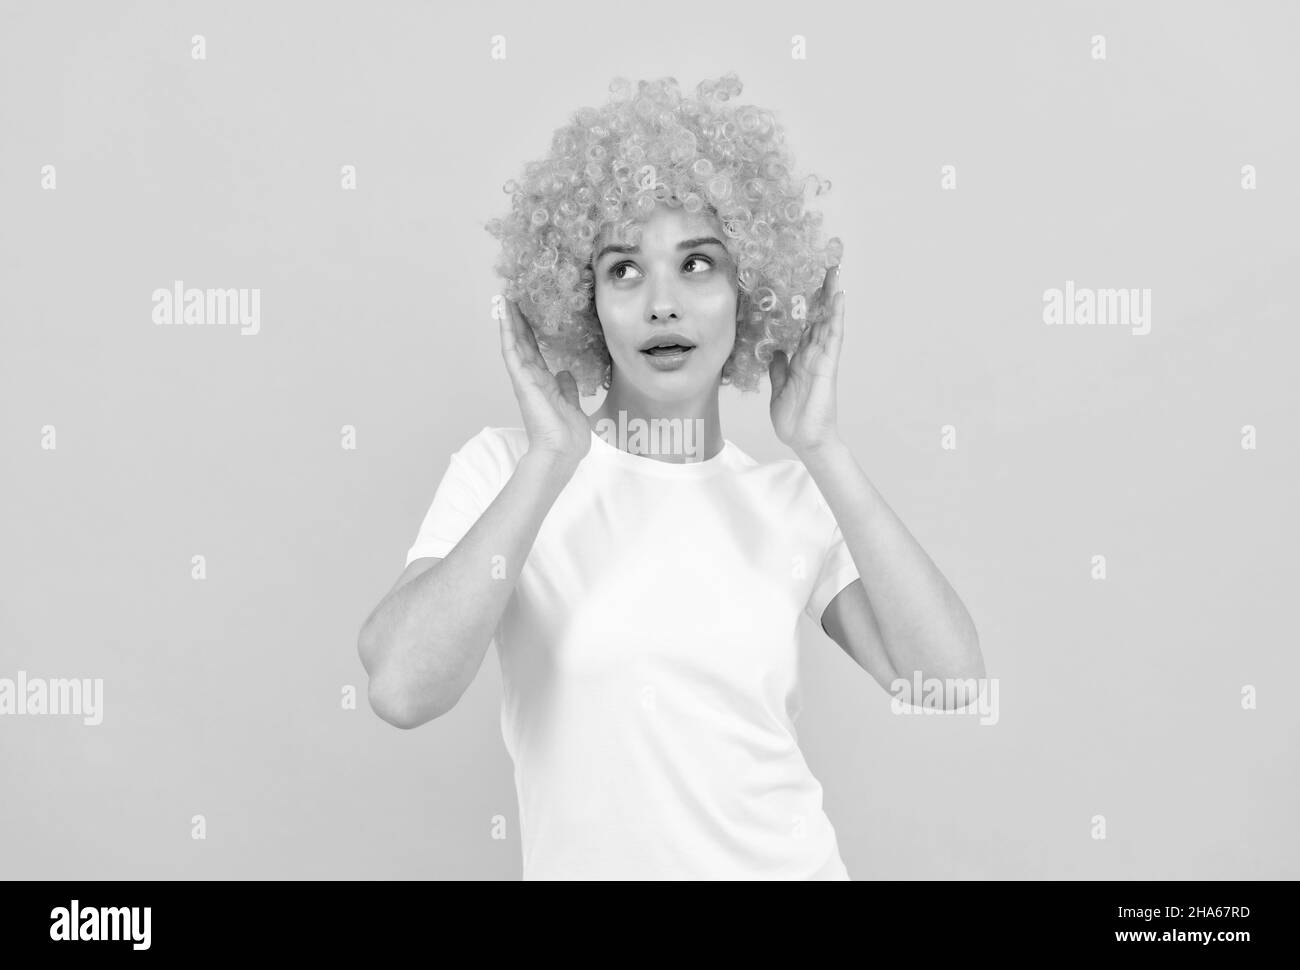 amazed fancy party look. freaky woman in clown wig on yellow background. express positive emotions. Stock Photo